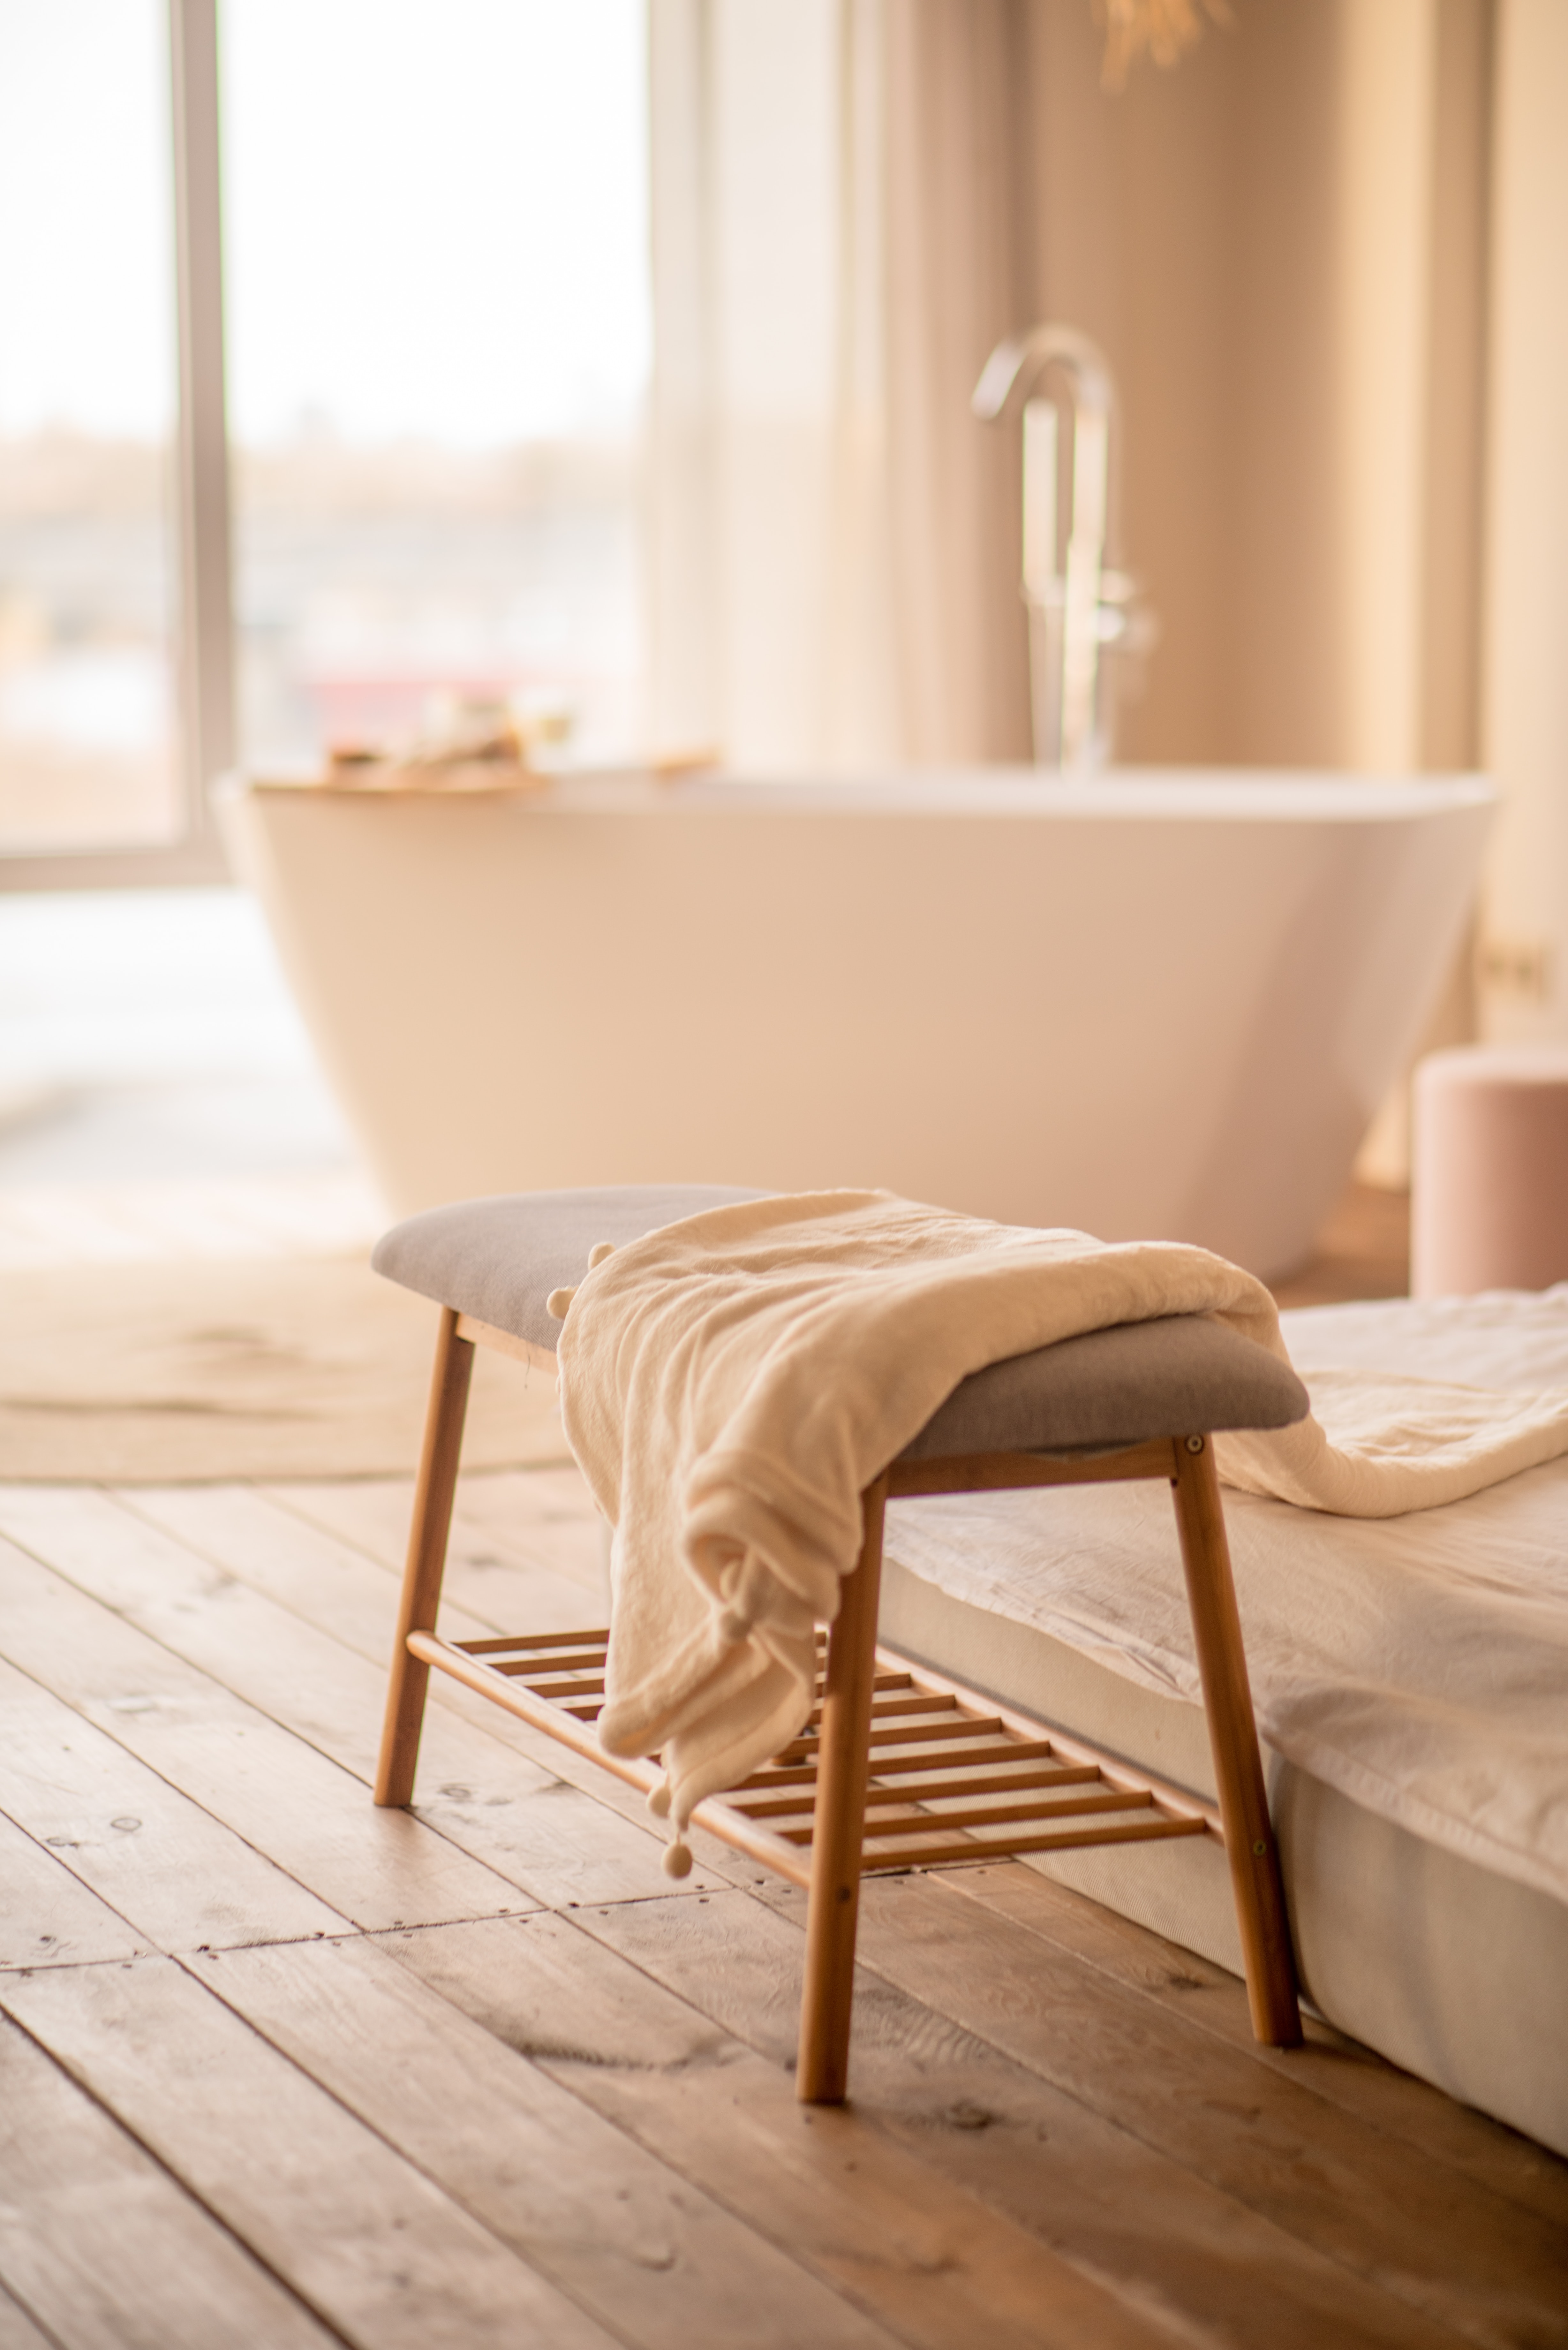 The big revamp: Bring your bathroom into the 21st century